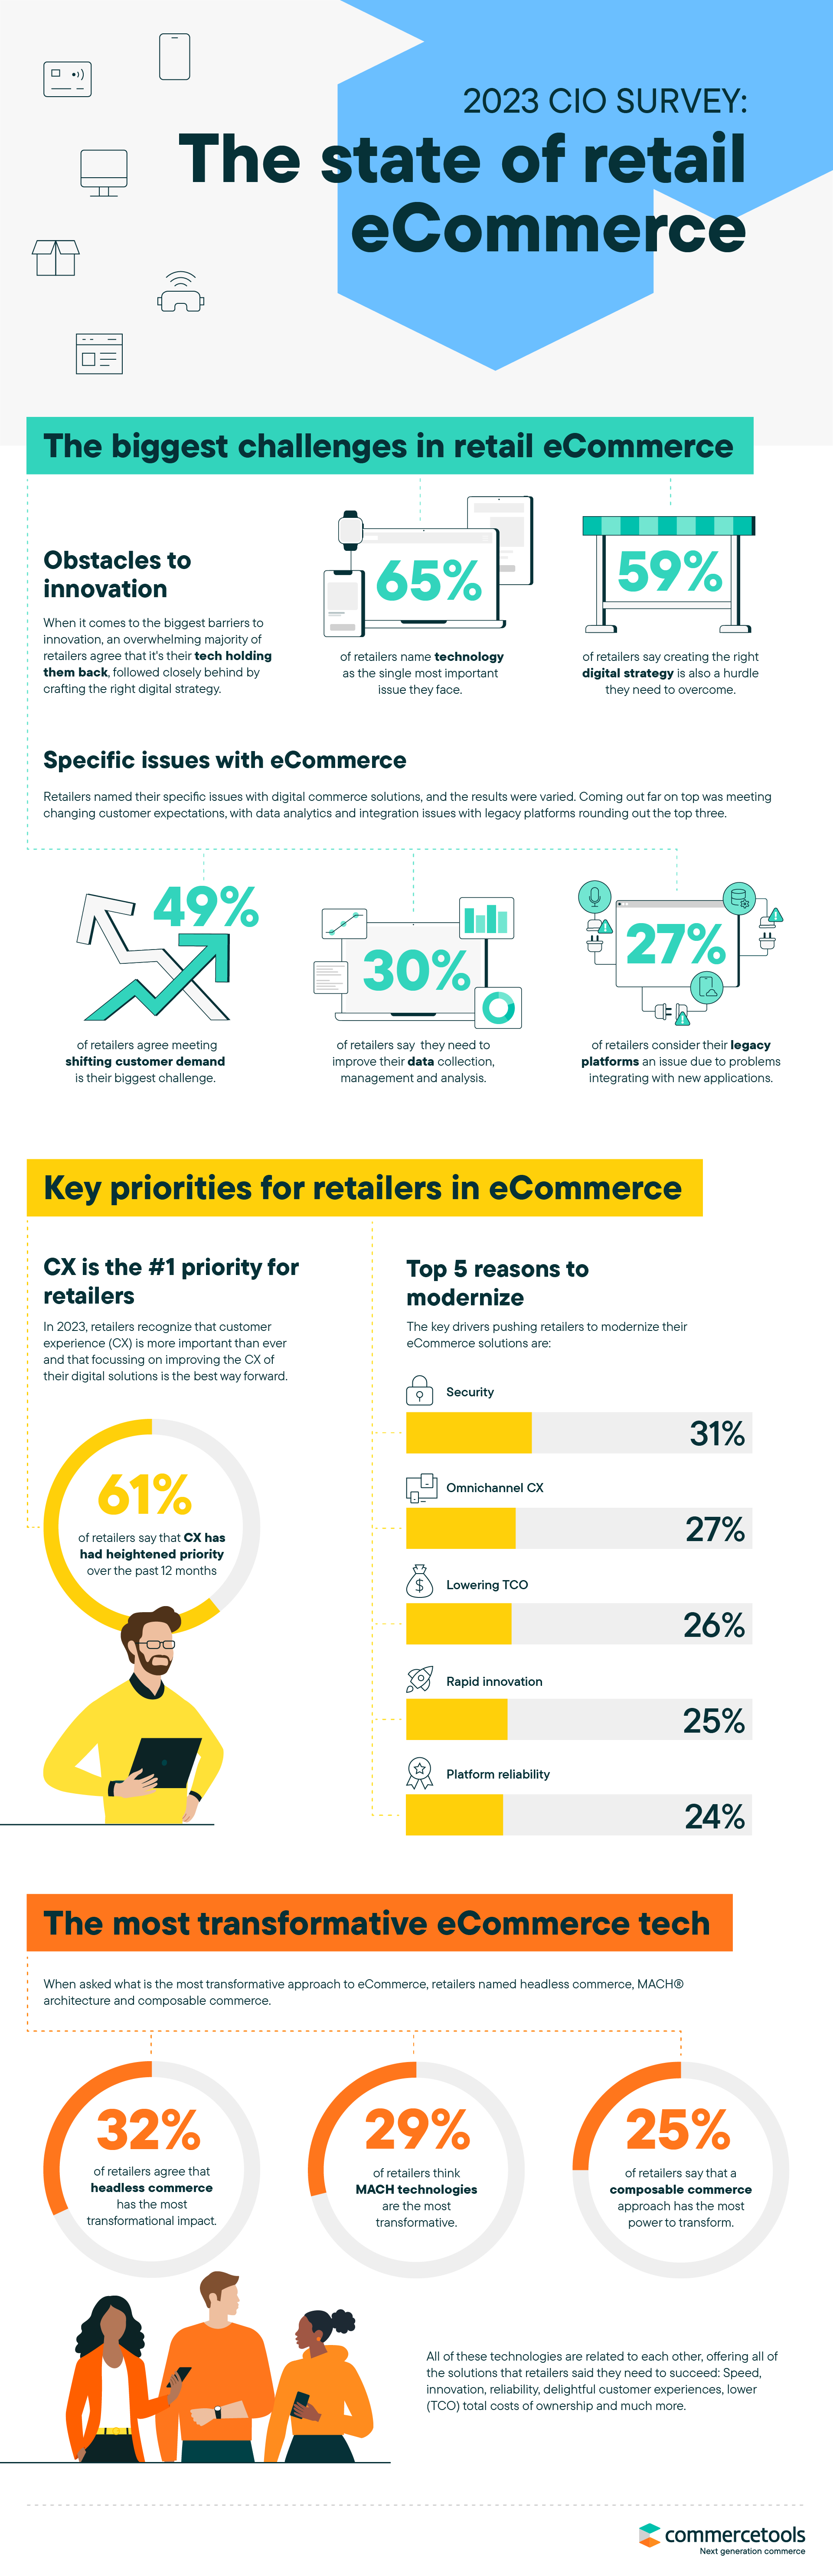 The most important retail eCommerce statistics by CIO